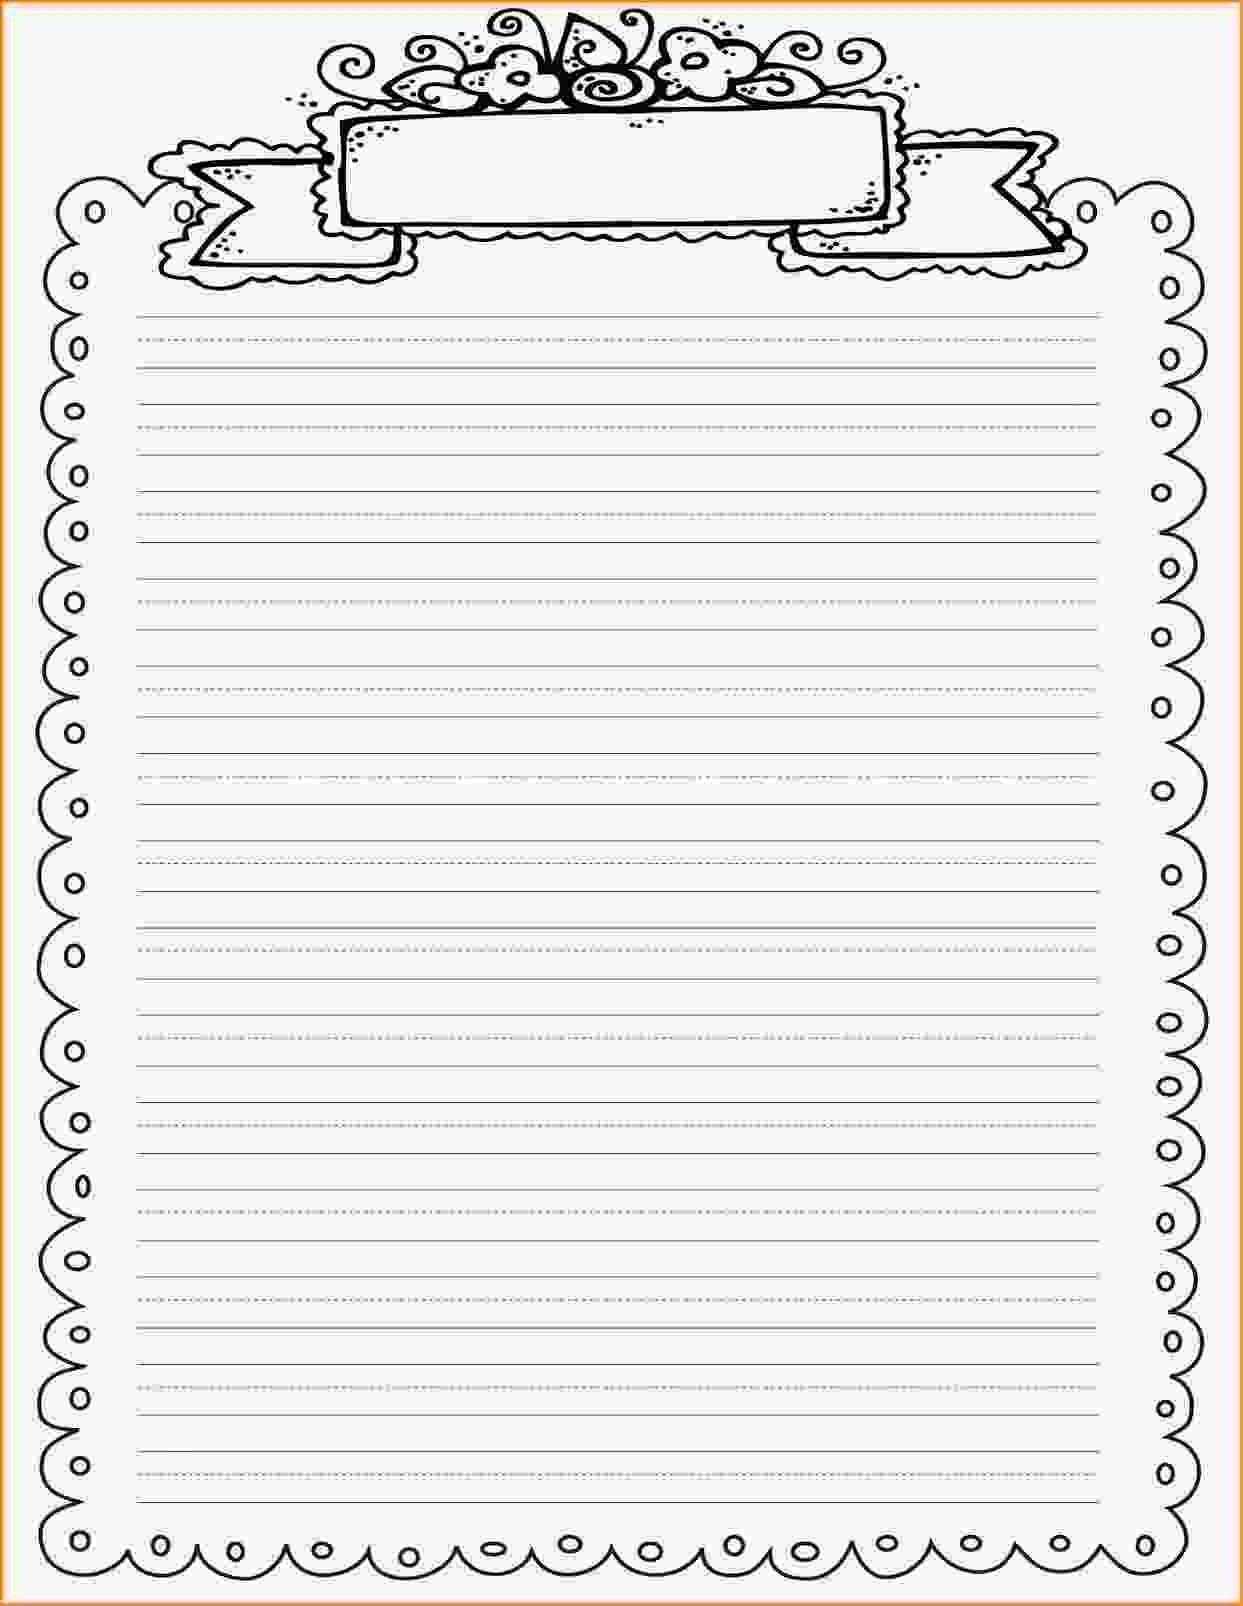 full-page-printable-lined-paper-printable-world-holiday